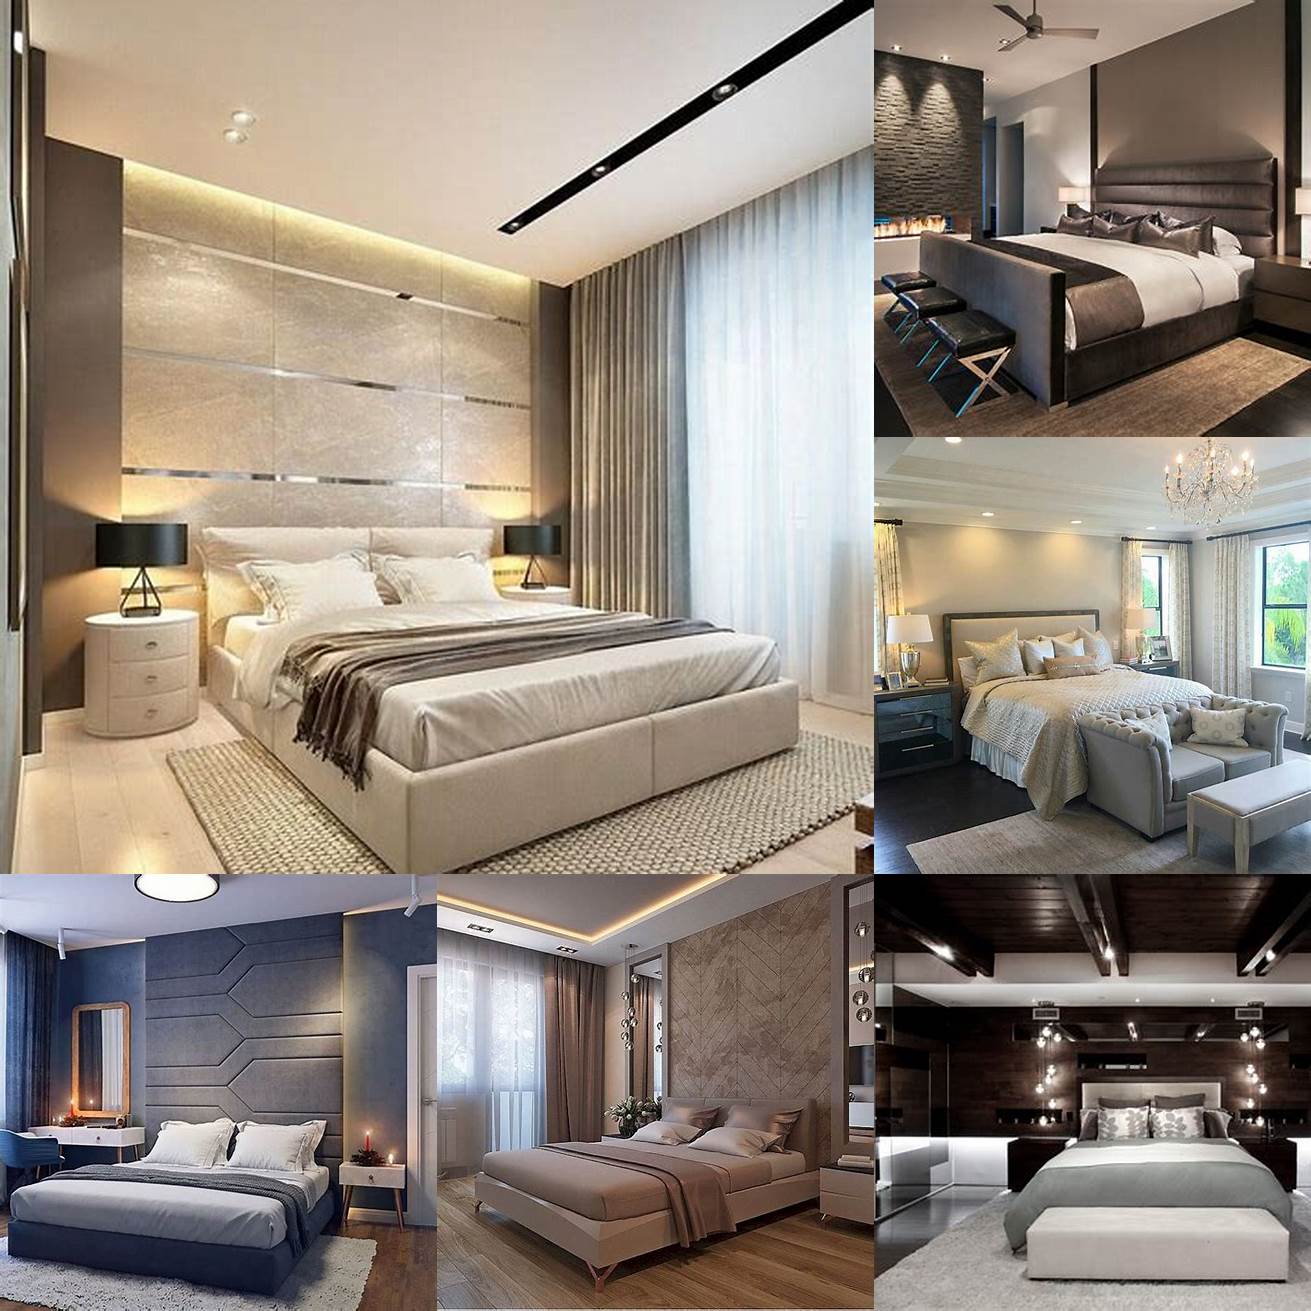 A modern bedroom double with a sleek design and neutral colors